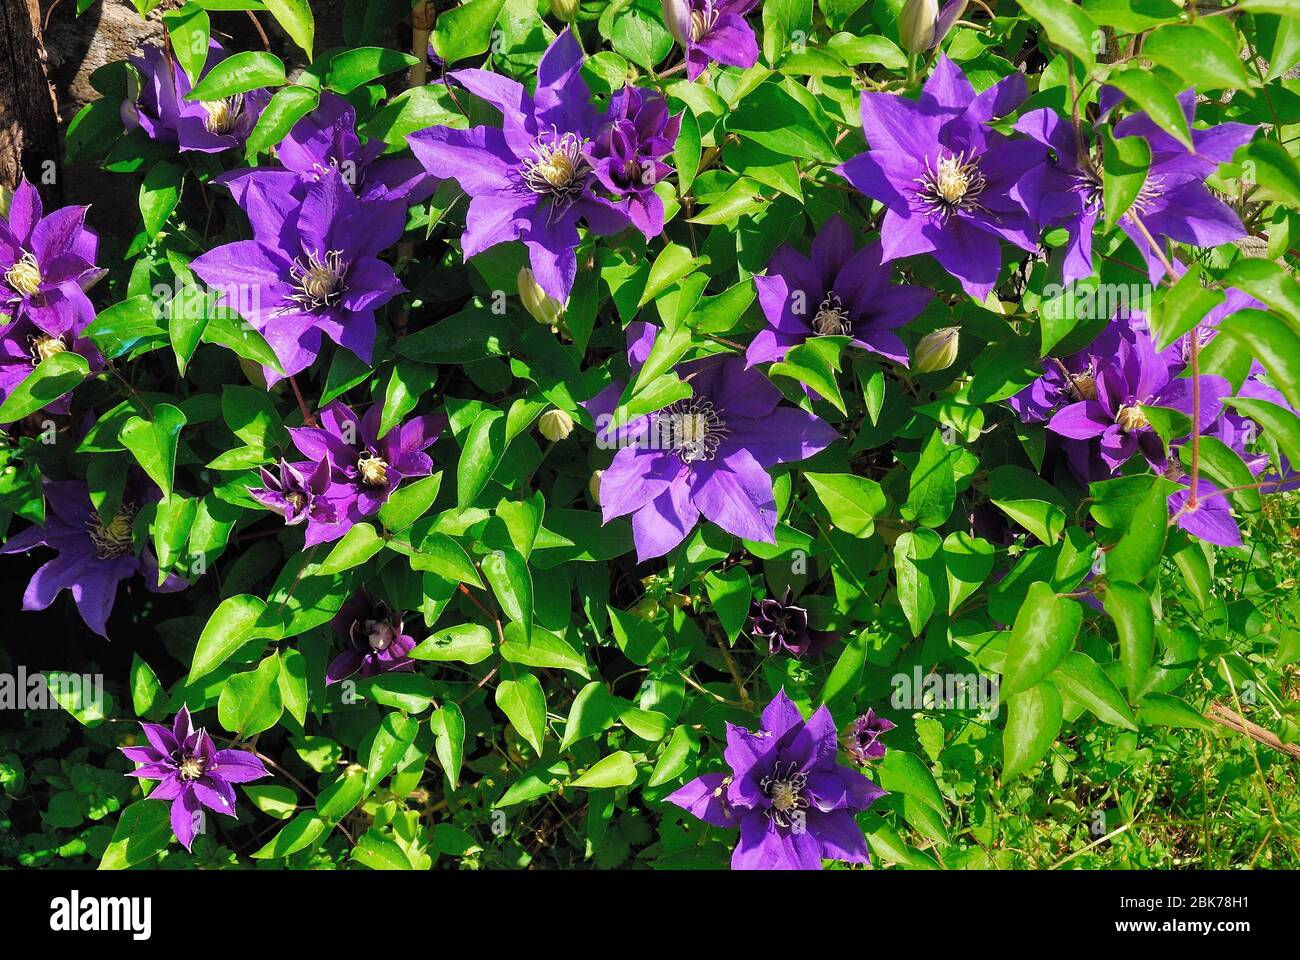 Clematis is a genus of about 300 species within the buttercup family, Ranunculaceae. Their garden hybrids have been popular among gardeners. Stock Photo